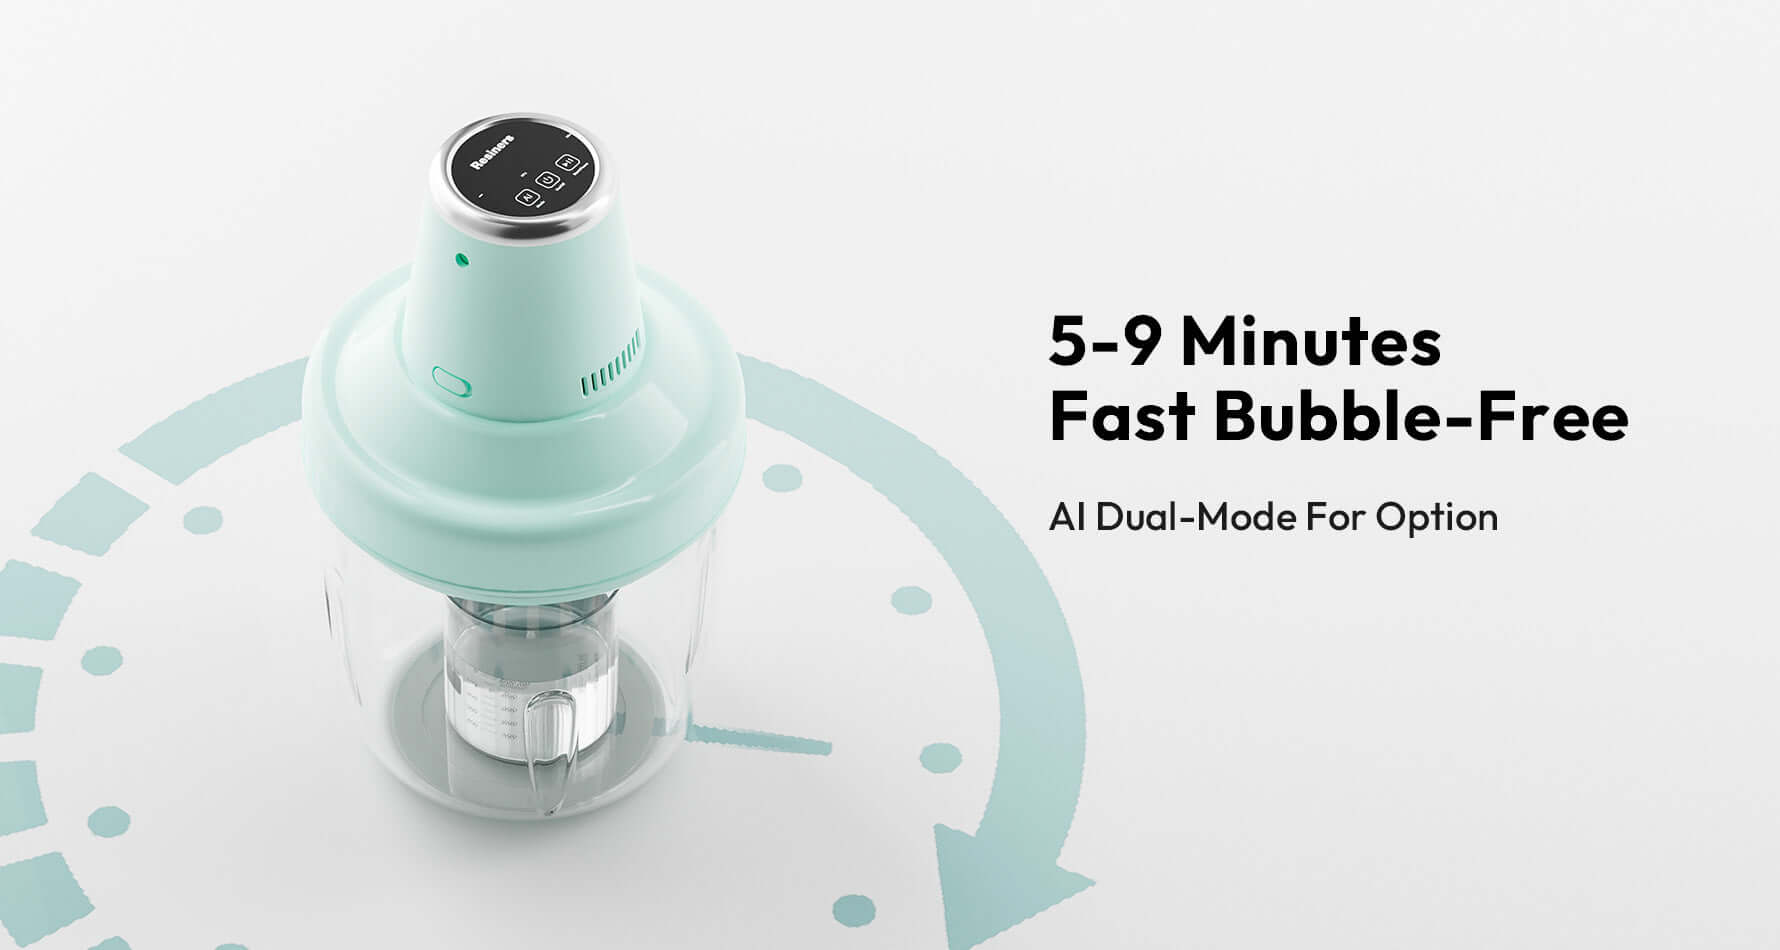 Trying out the Airless Bubble Remover Machine. I'm excited to give thi